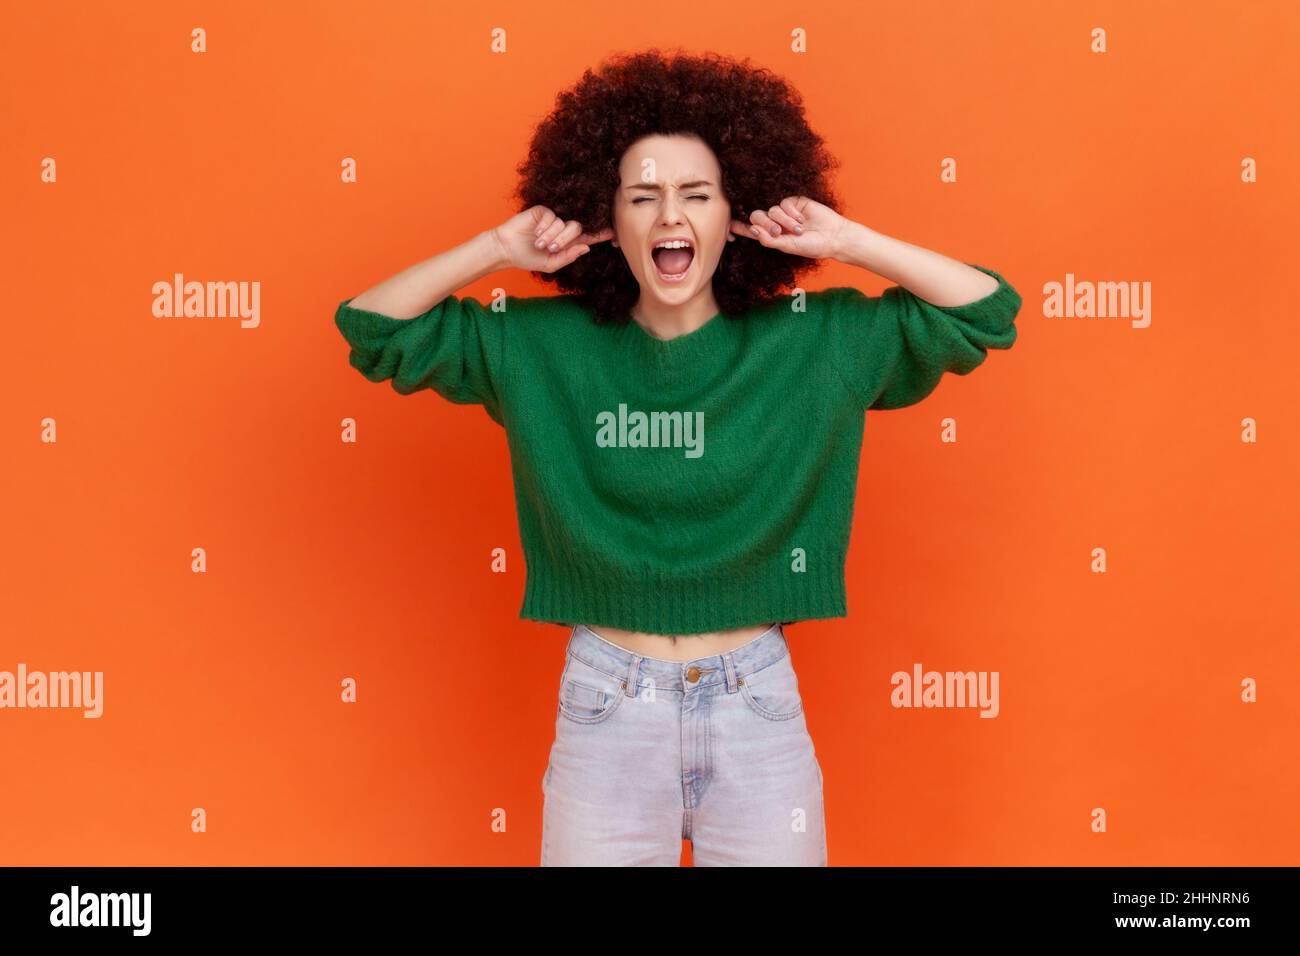 Irritated woman with Afro hairstyle wearing green sweater closing her eyes and ears with fingers, tired of bothersome loud sound, high decibel alarm. Indoor studio shot isolated on orange background. Stock Photo